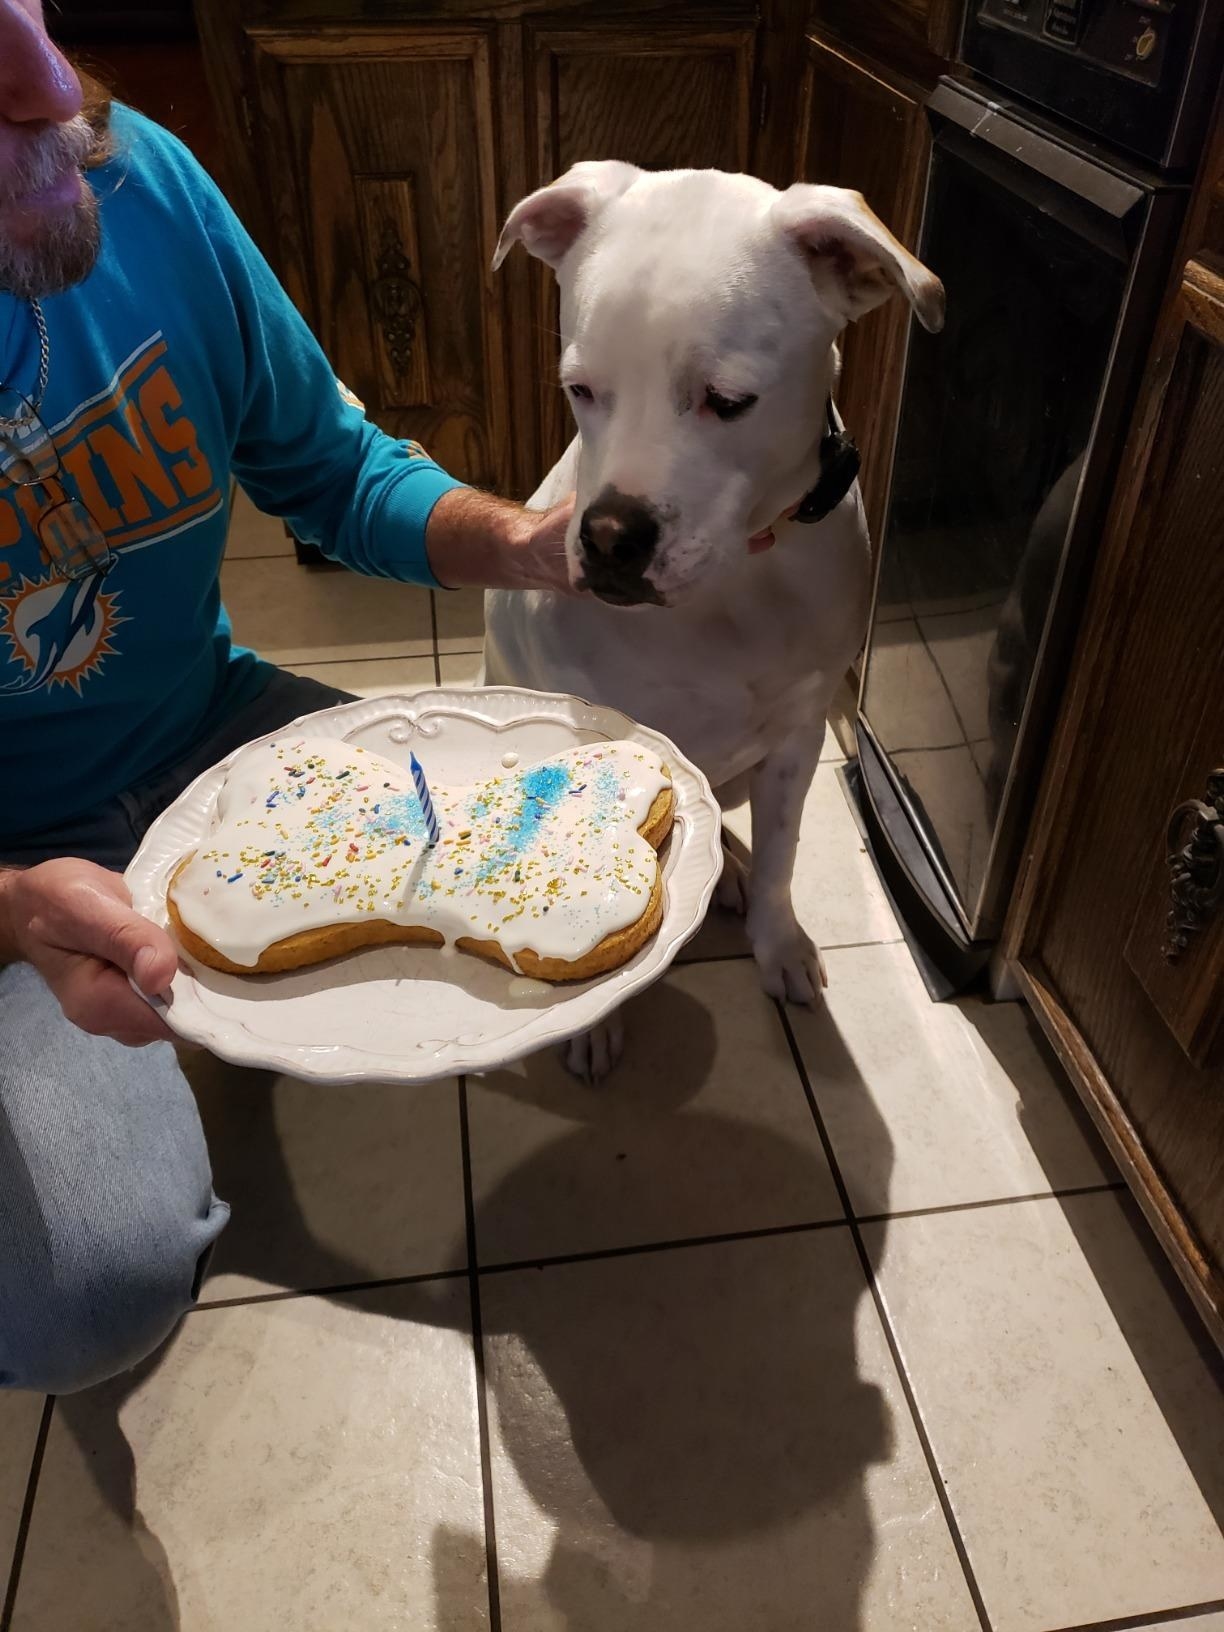 A dog and their cake